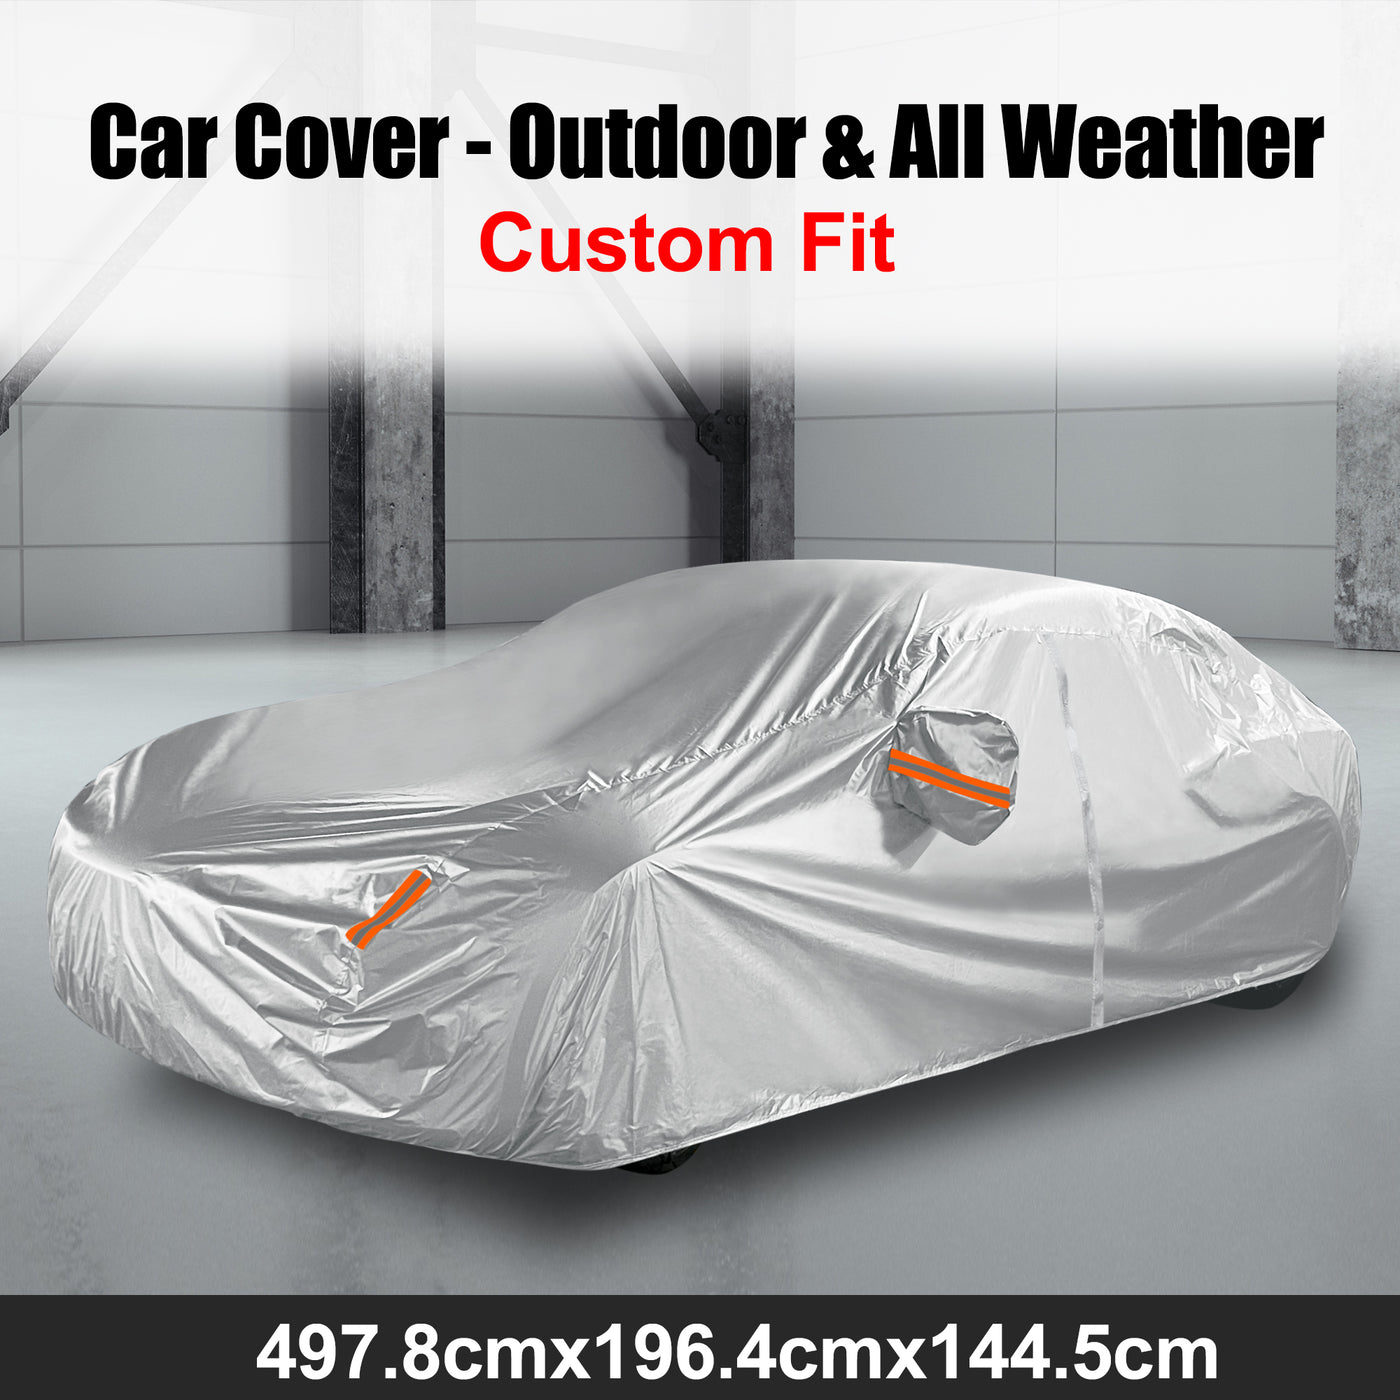 X AUTOHAUX Car Cover Full Car Custom Fit for Tesla S Model S 2012-2022 Waterproof Dustproof Windproof Snow Sun Heat Protection Outdoor All Weather Accessories 190T